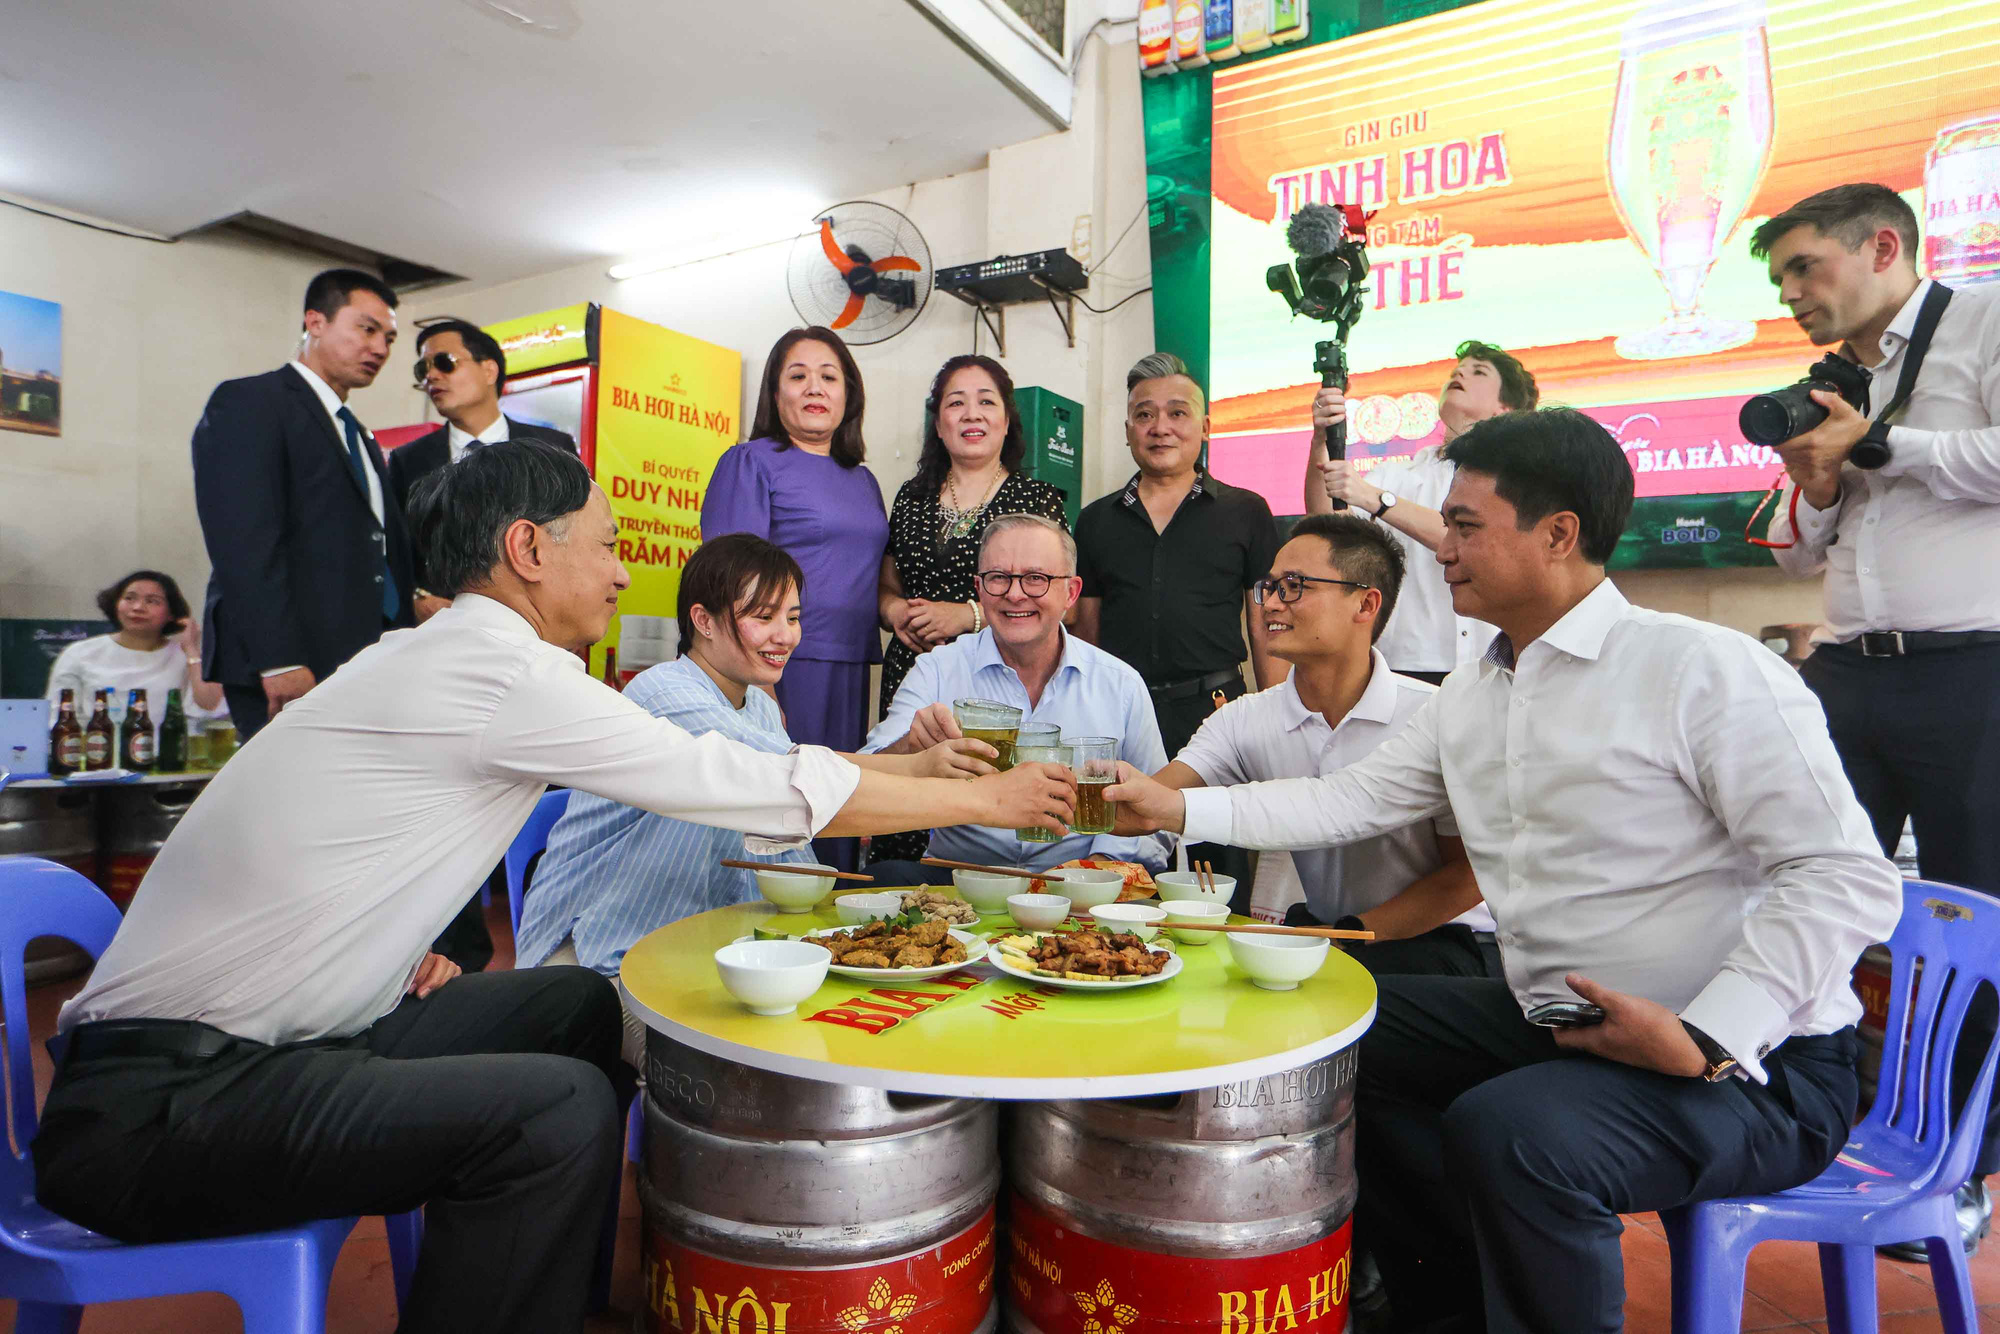 The Australian government leader shows his interest in the beer drinking culture of Hanoi